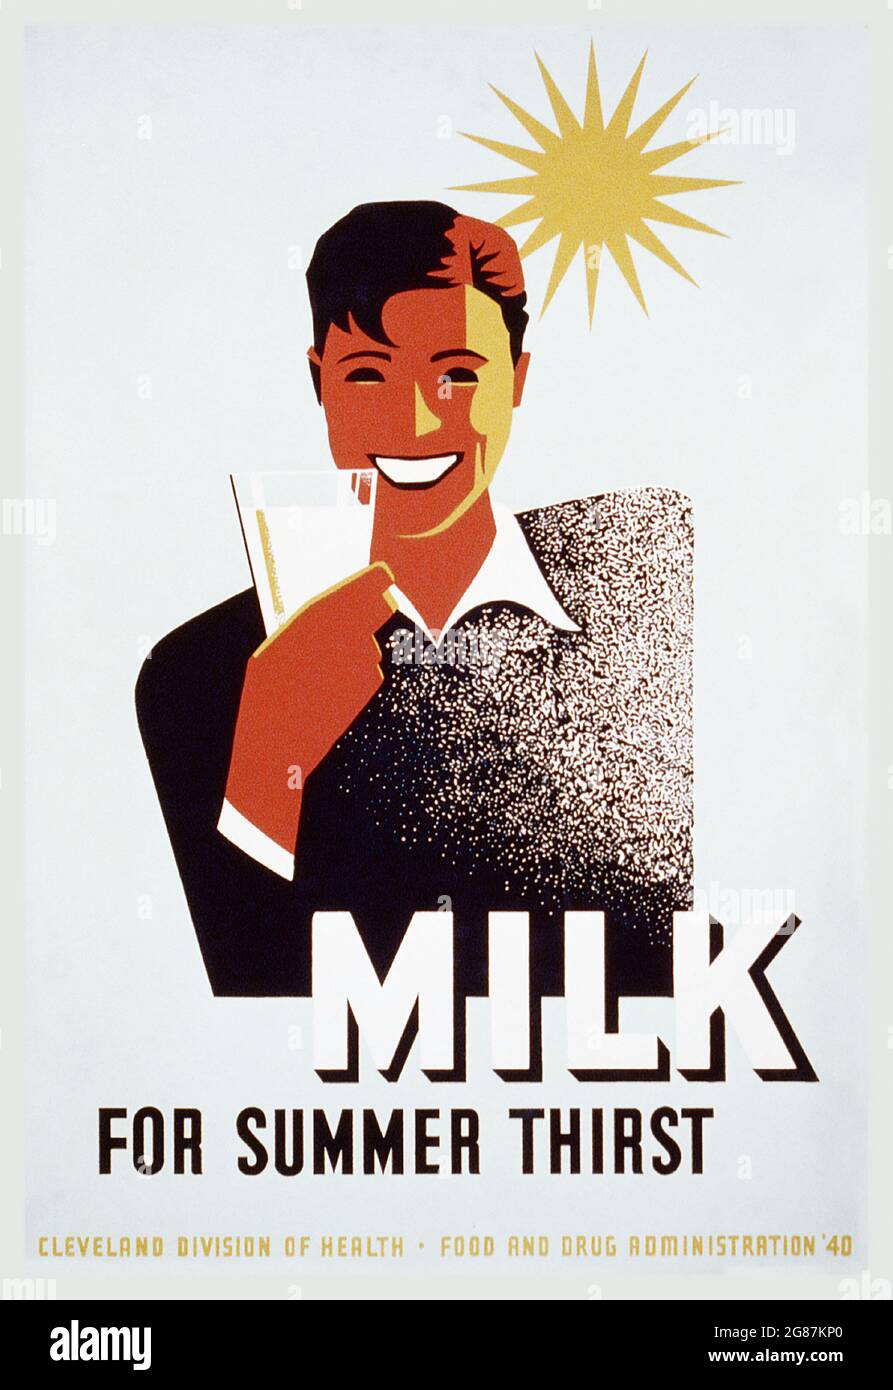 Milk for Summer Thirst – poster for the Cleveland Division of Health promoting milk. WPA – Works Progress Administration poster. 1940. Stock Photo